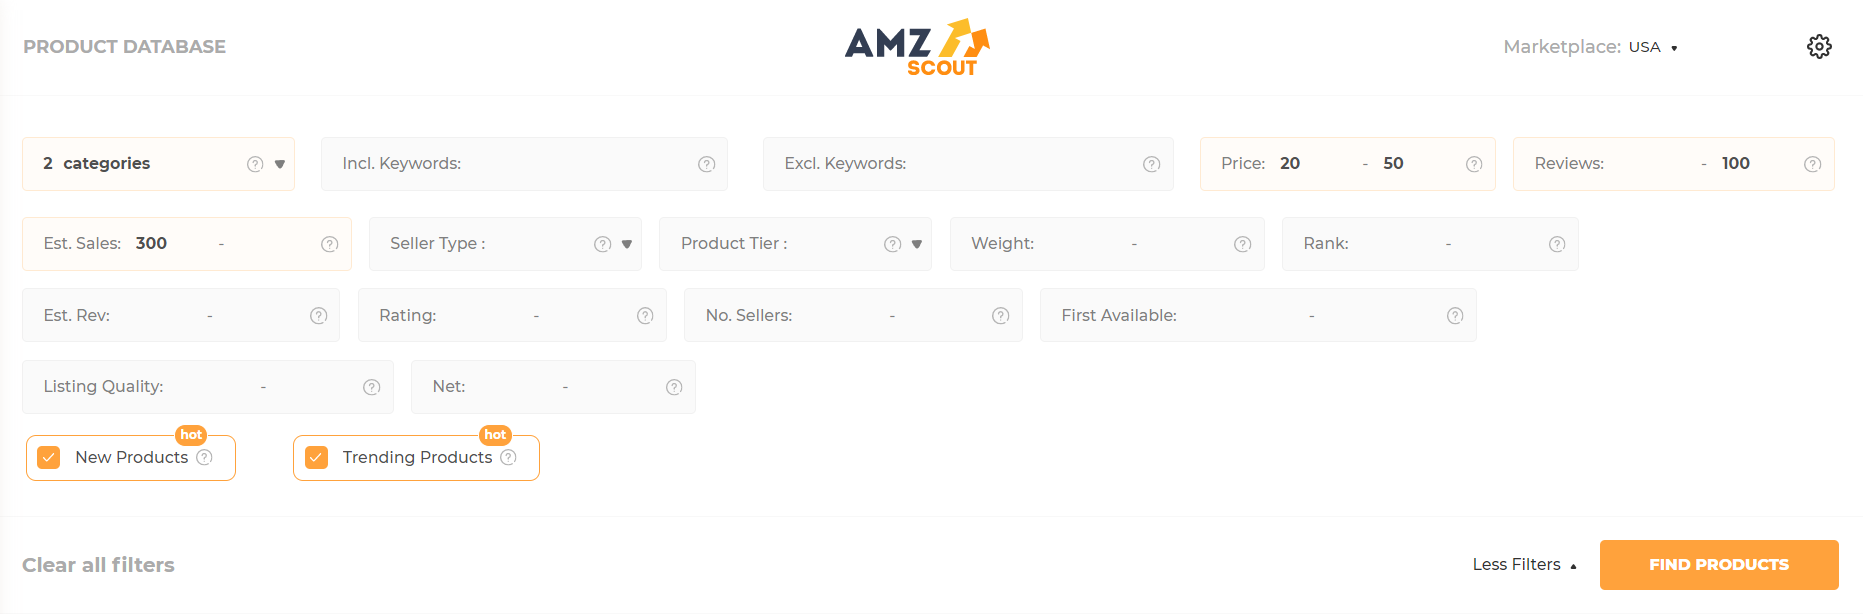 Find the best sellers using AMZScout Product Database